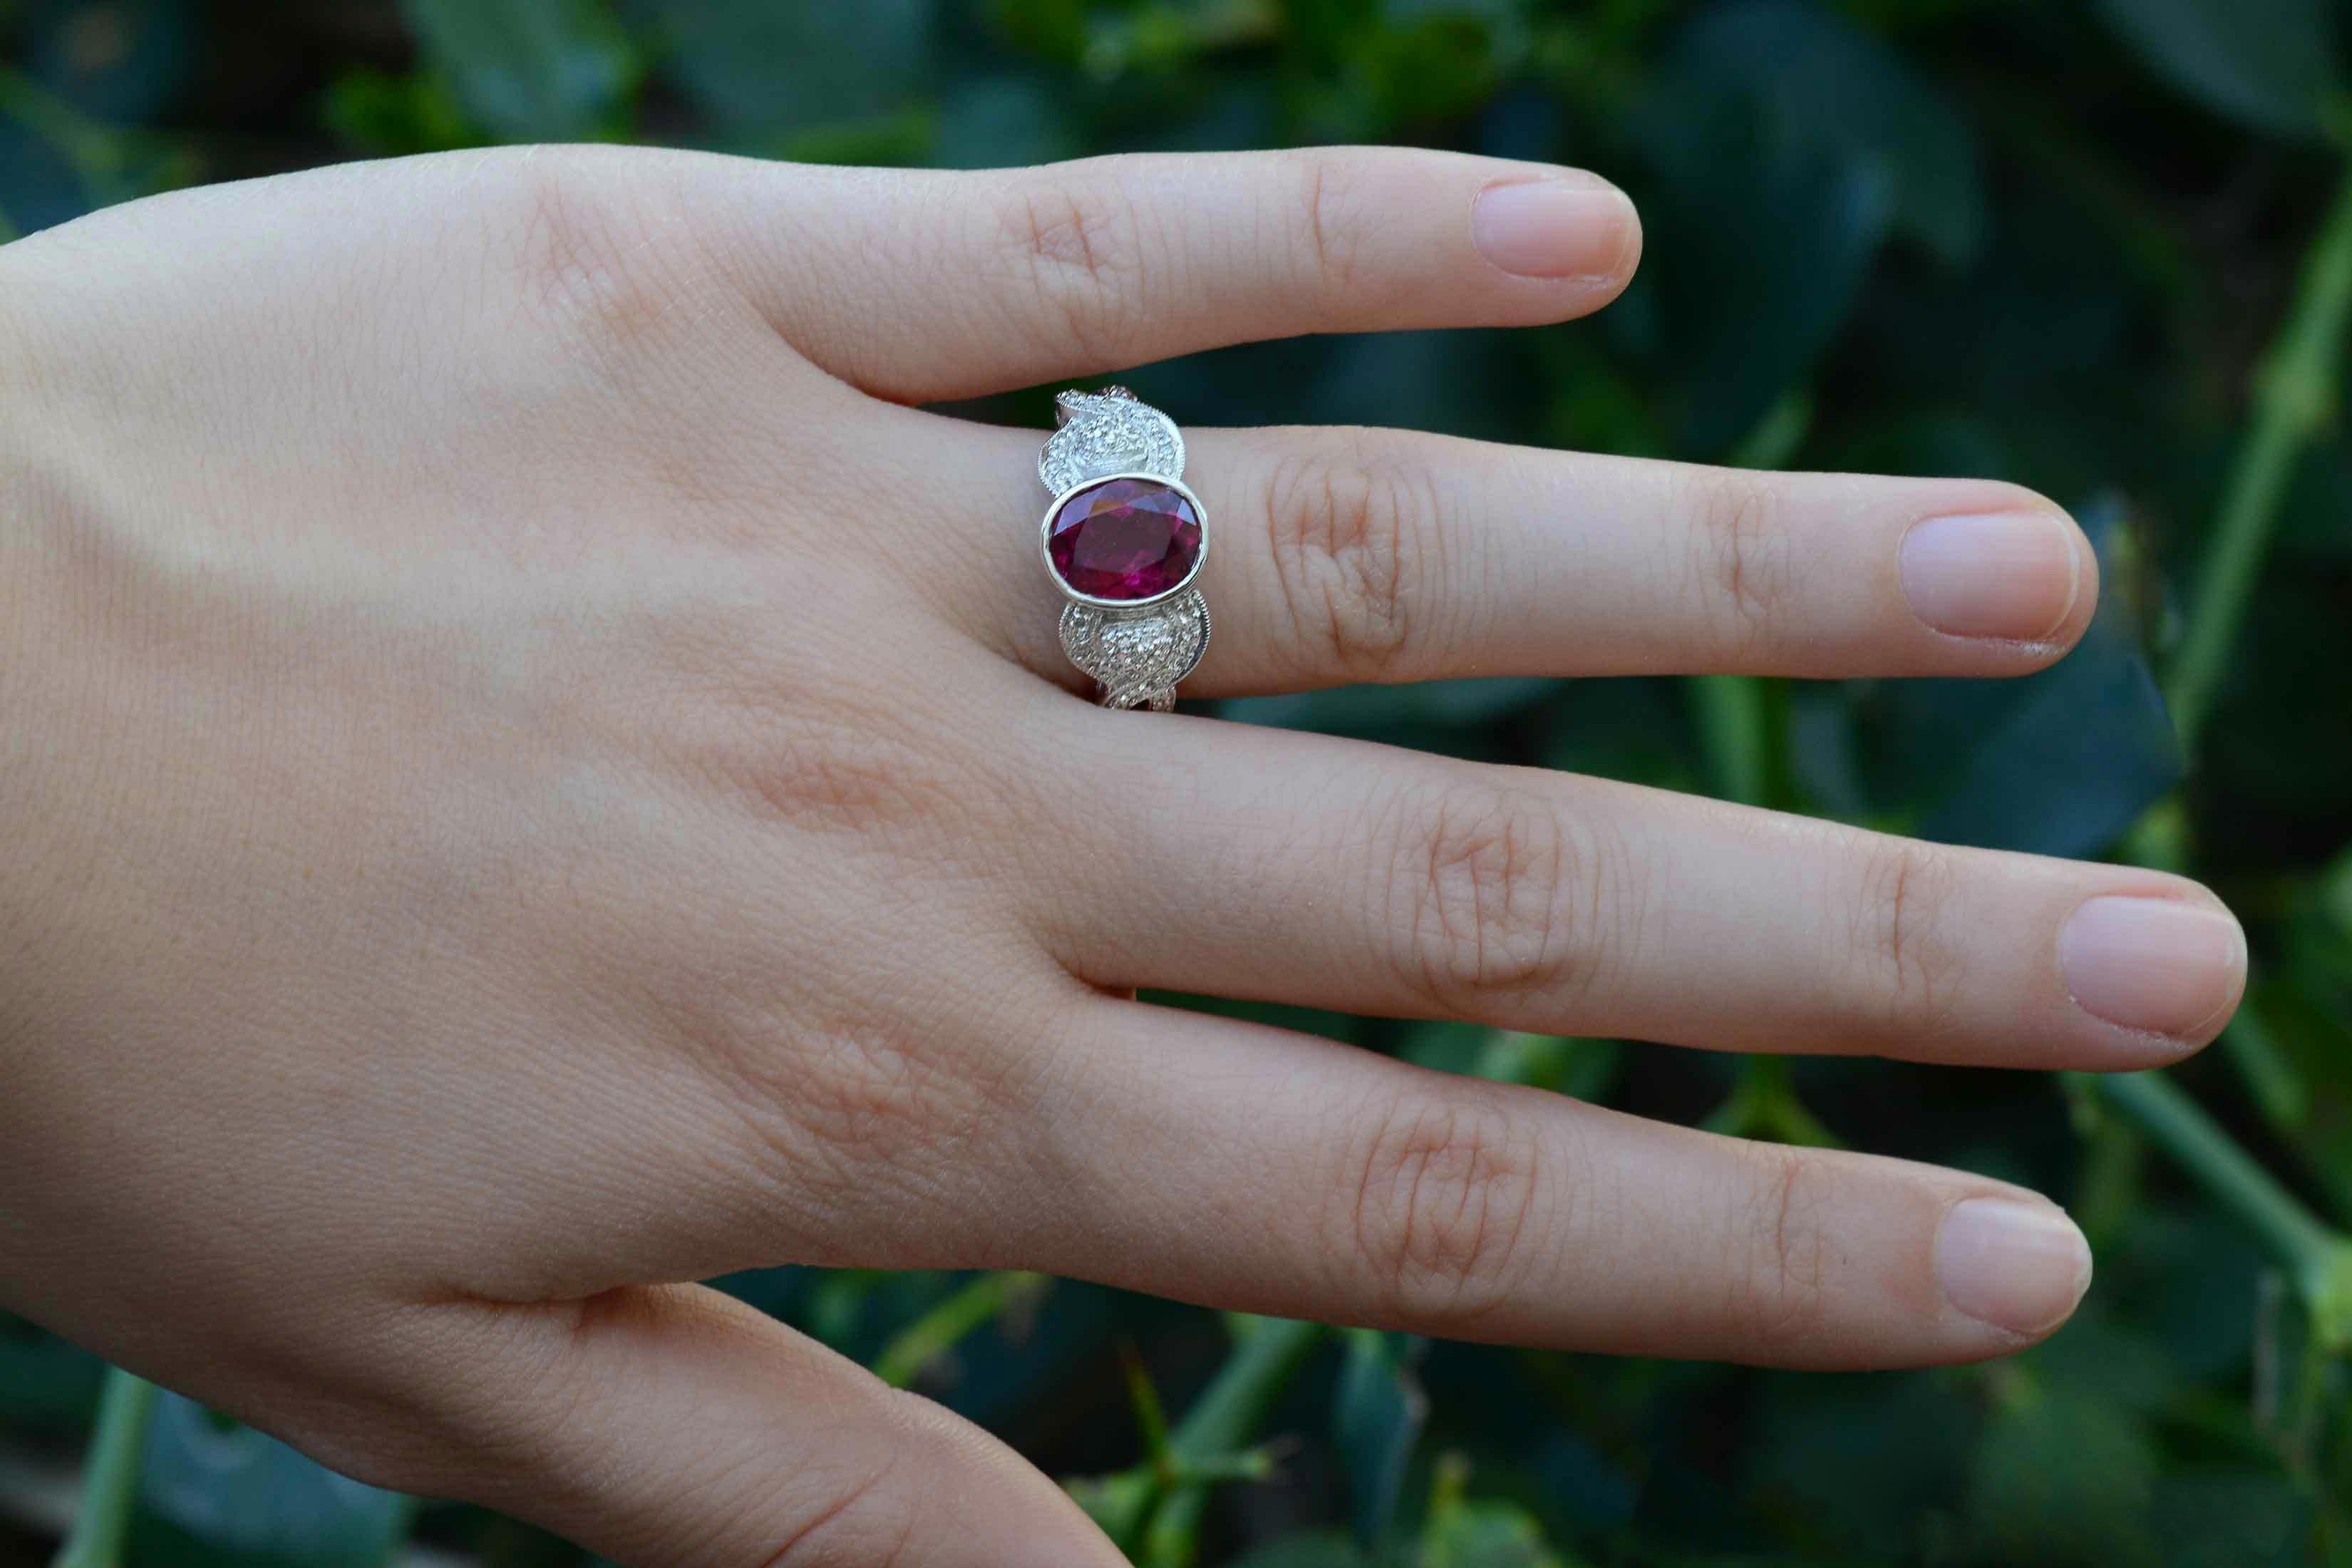 The San Clémente vintage engagement ring. A most intriguing and vibrant pink tourmaline set within a bezel is accompanied by a symphony of glimmering white diamonds in the crossover band. Lovingly crafted of 18K white gold, you'll love the way it